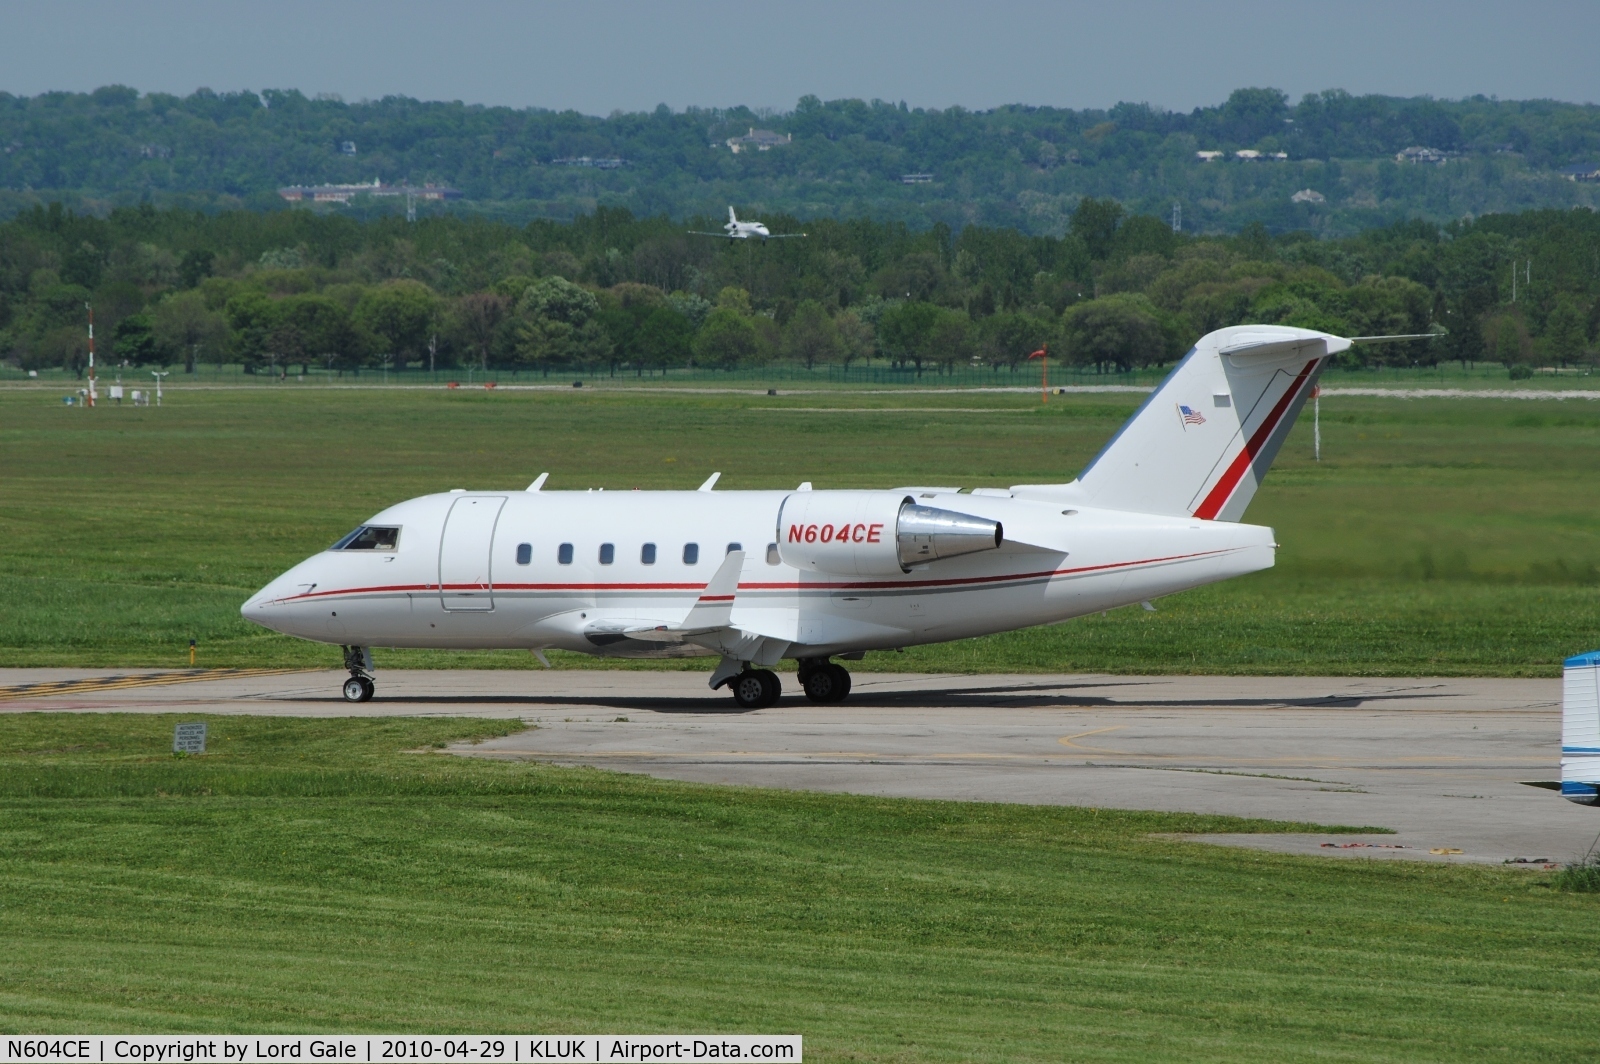 N604CE, 2000 Bombardier Challenger 604 (CL-600-2B16) C/N 5446, Arriving as Reynolds Jet 4108. Citation XLS N145PK on final in the background.